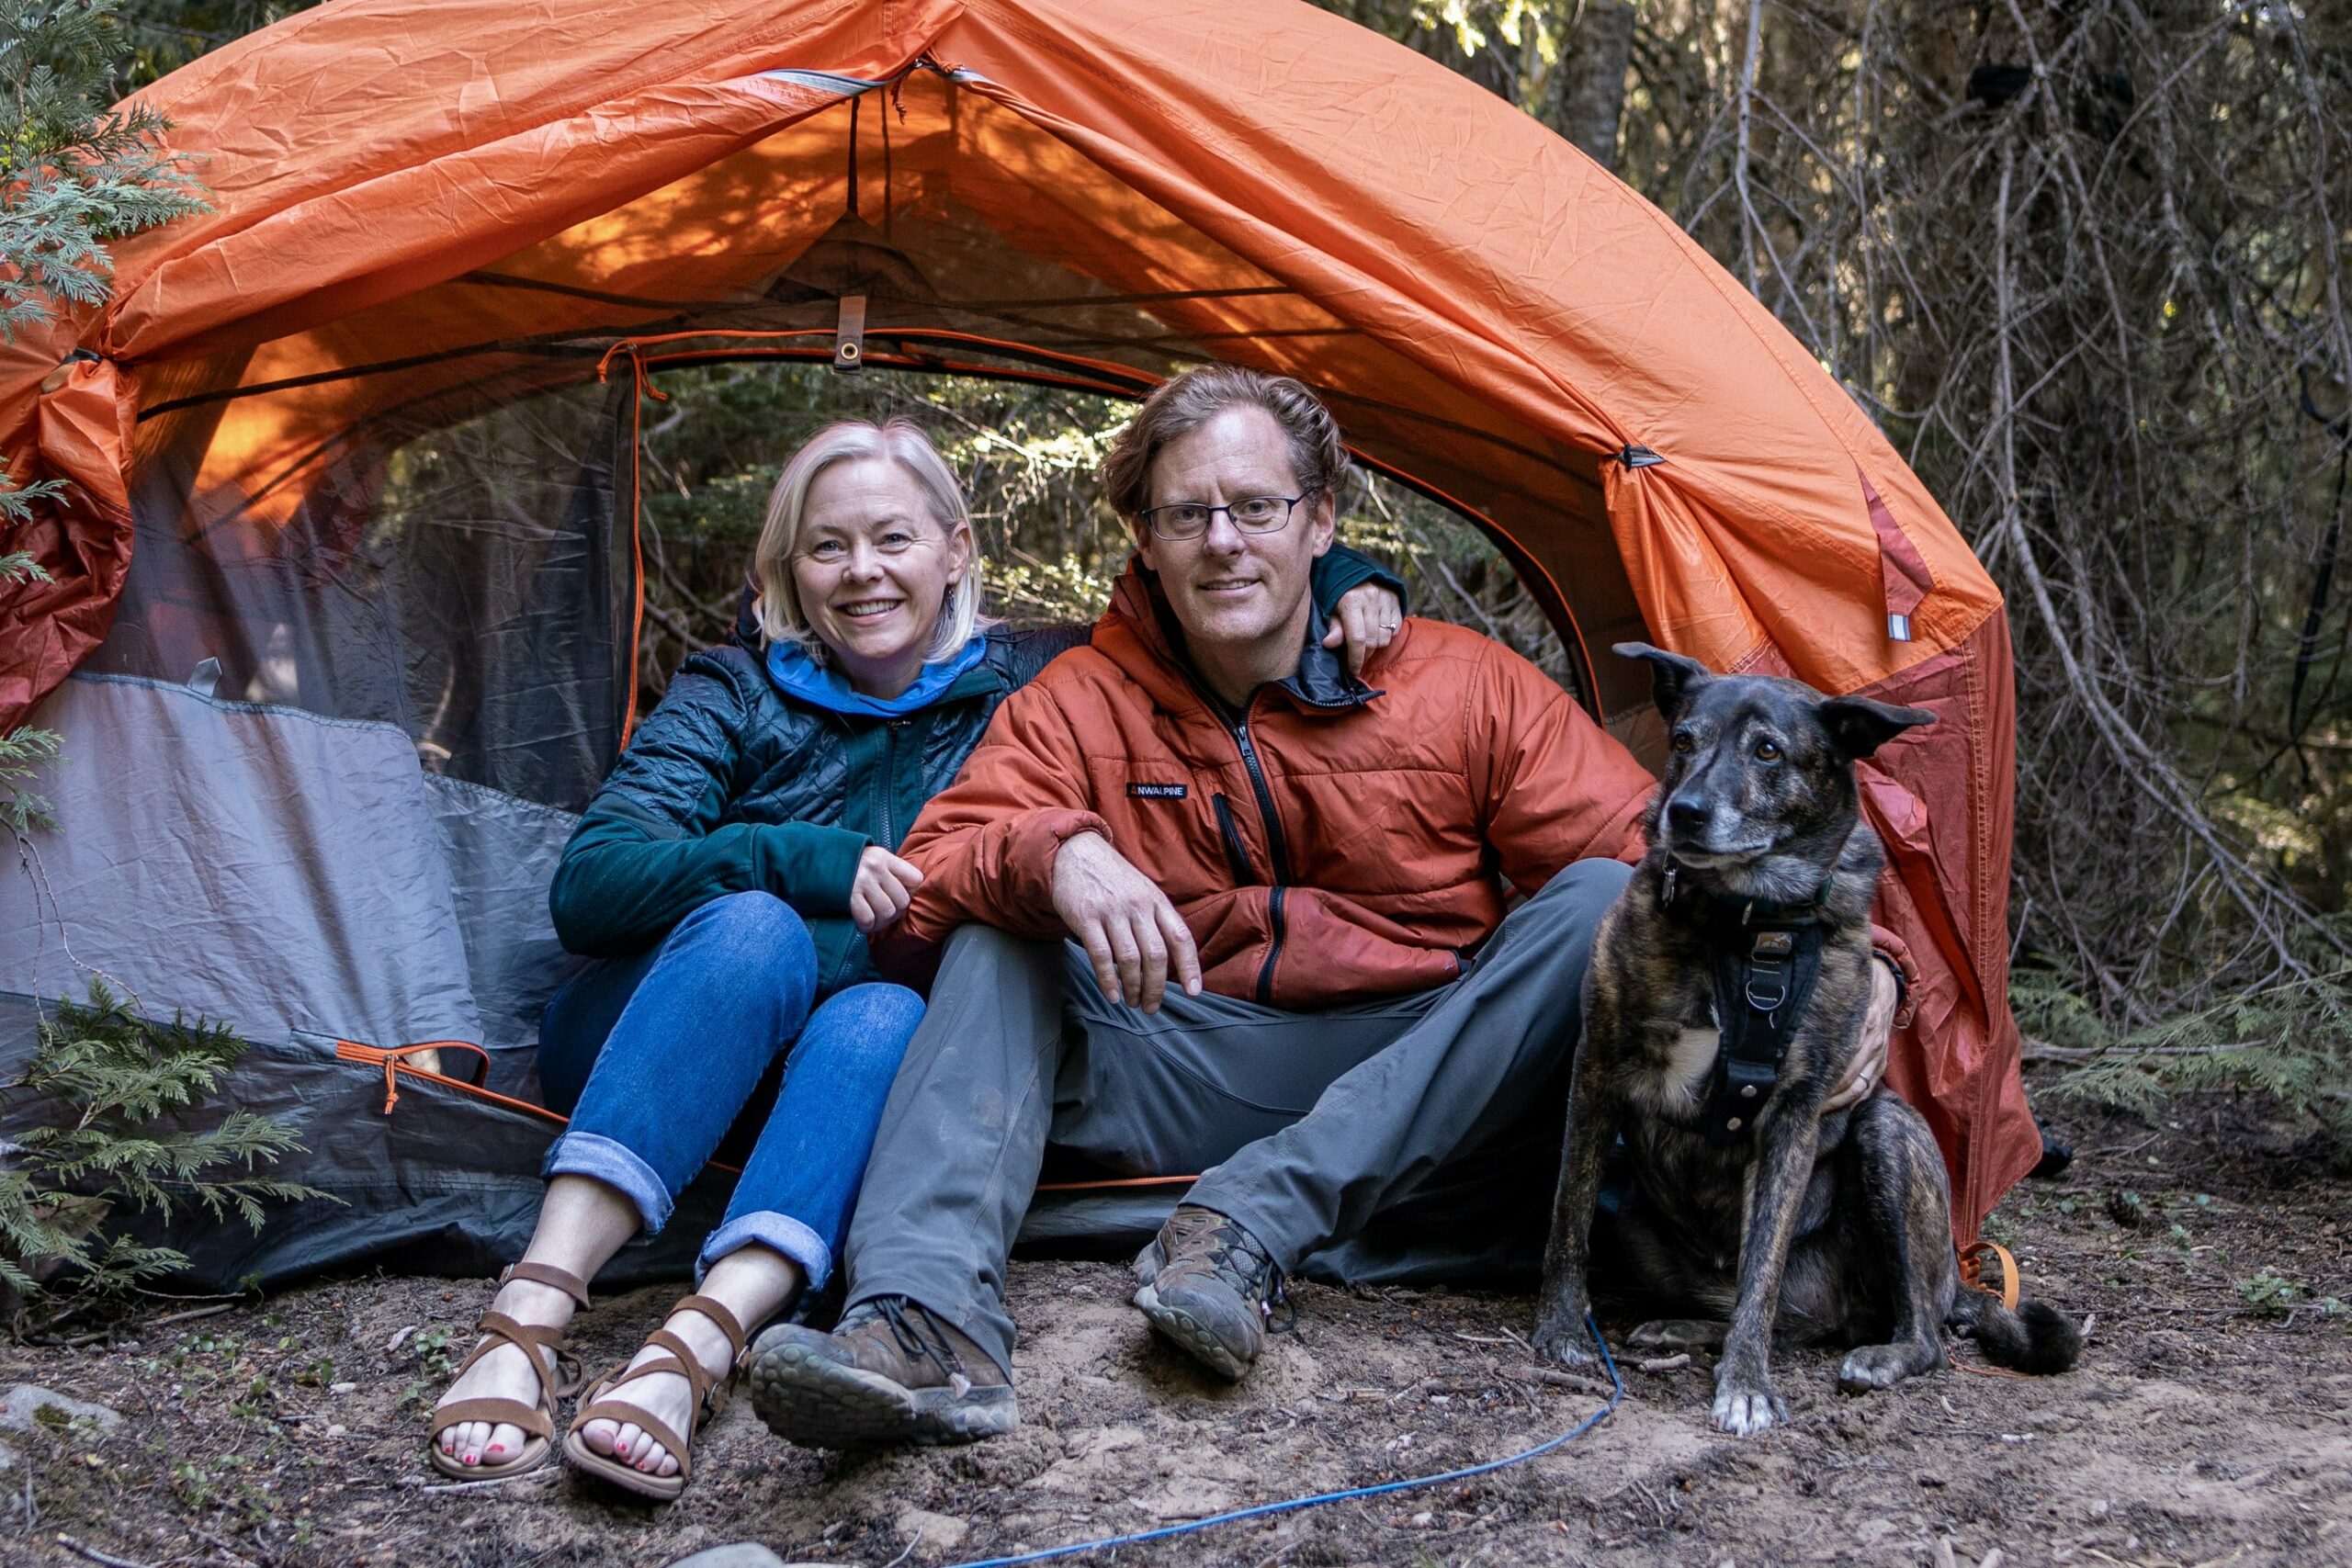 The Dyrt Names Most Dog-Friendly Campgrounds in U.S. – RVBusiness – Breaking RV Industry News